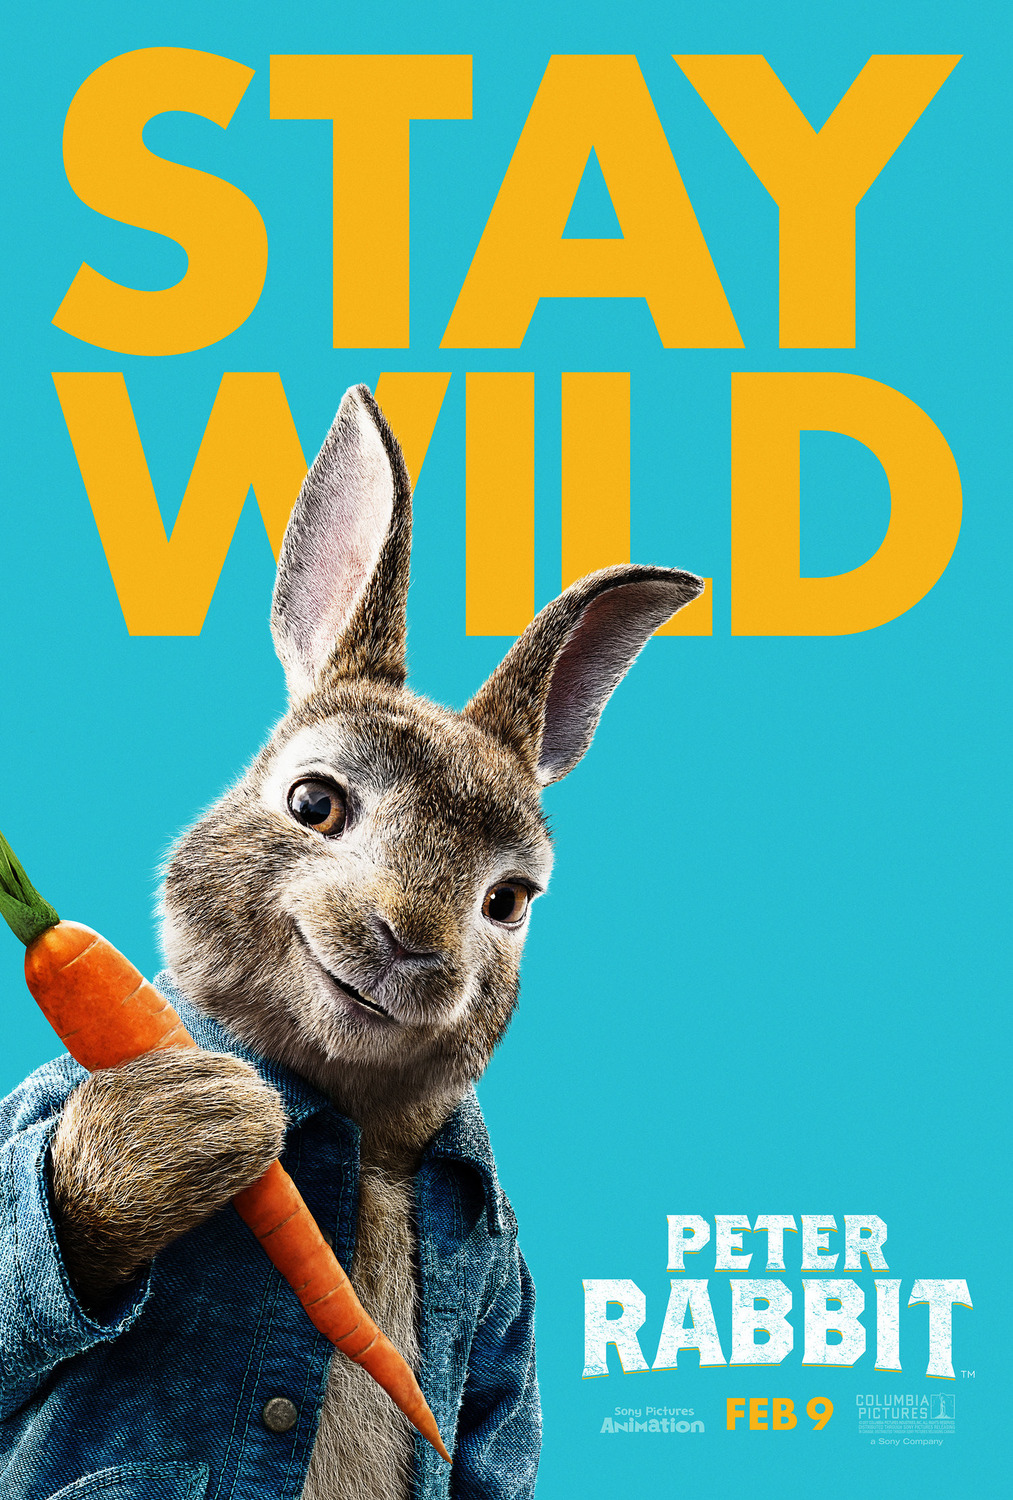 Extra Large Movie Poster Image for Peter Rabbit (#22 of 27)